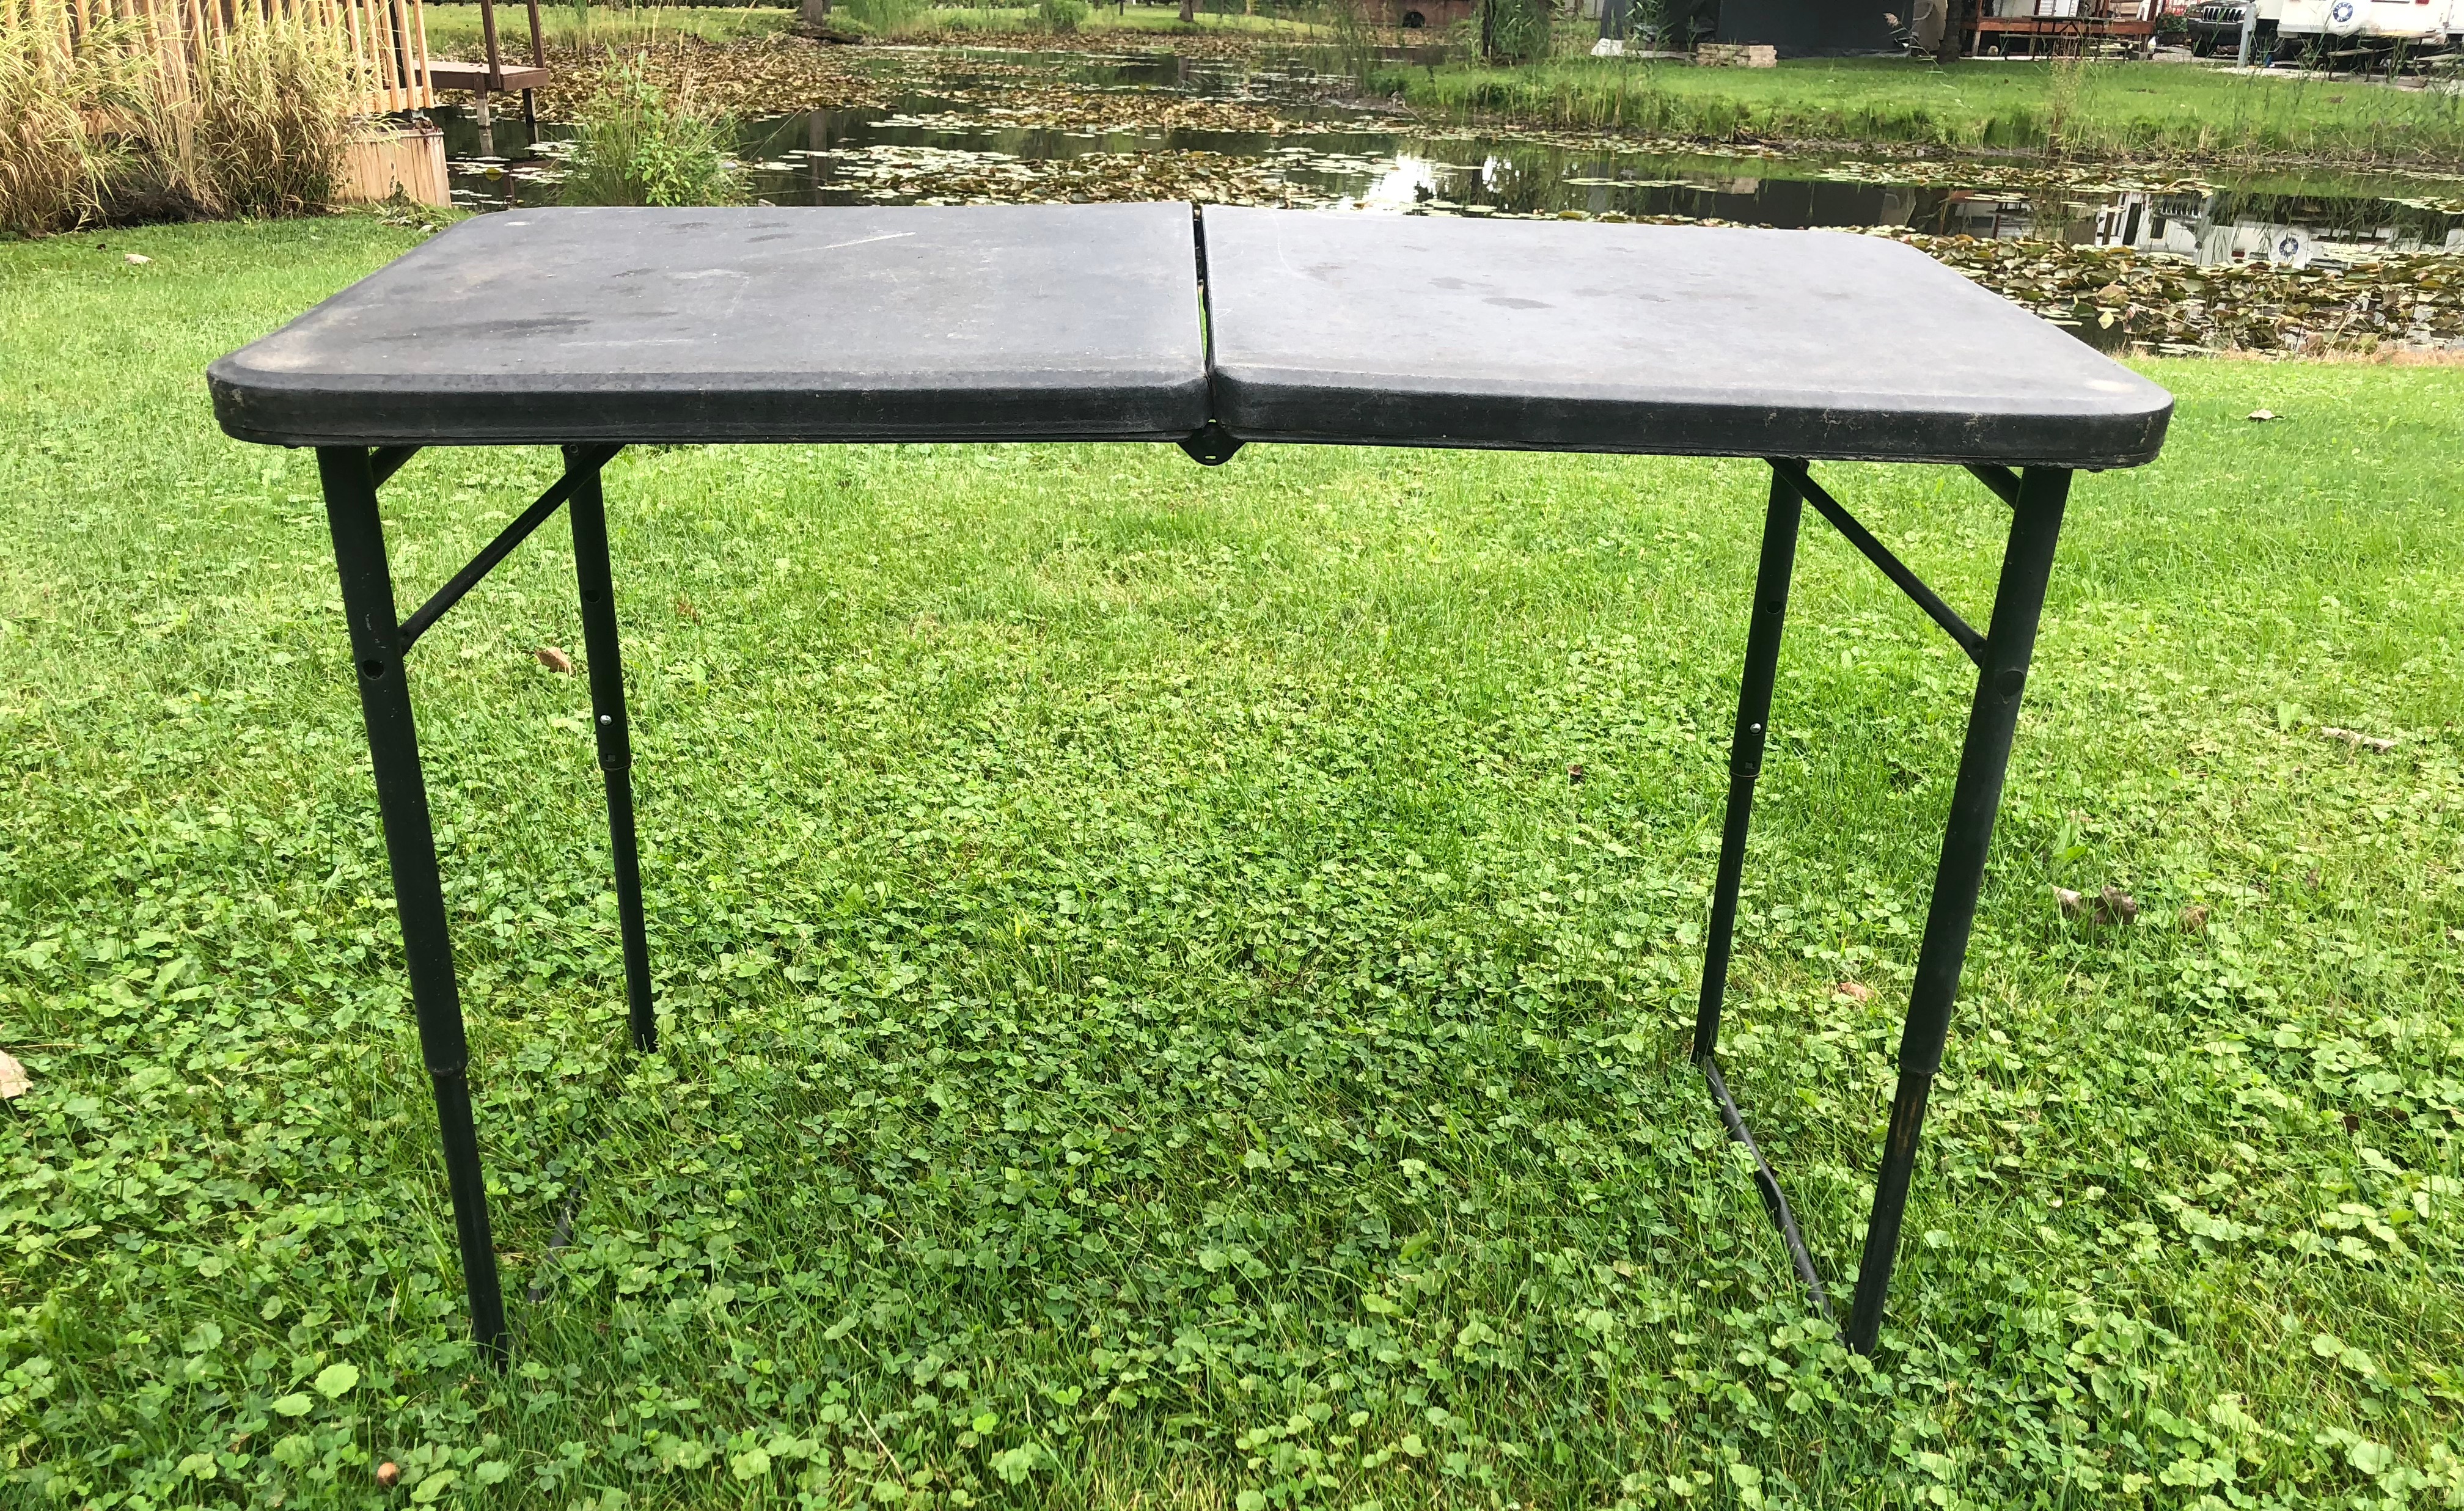 Use folding tables for cooking and eating outdoors at the campground